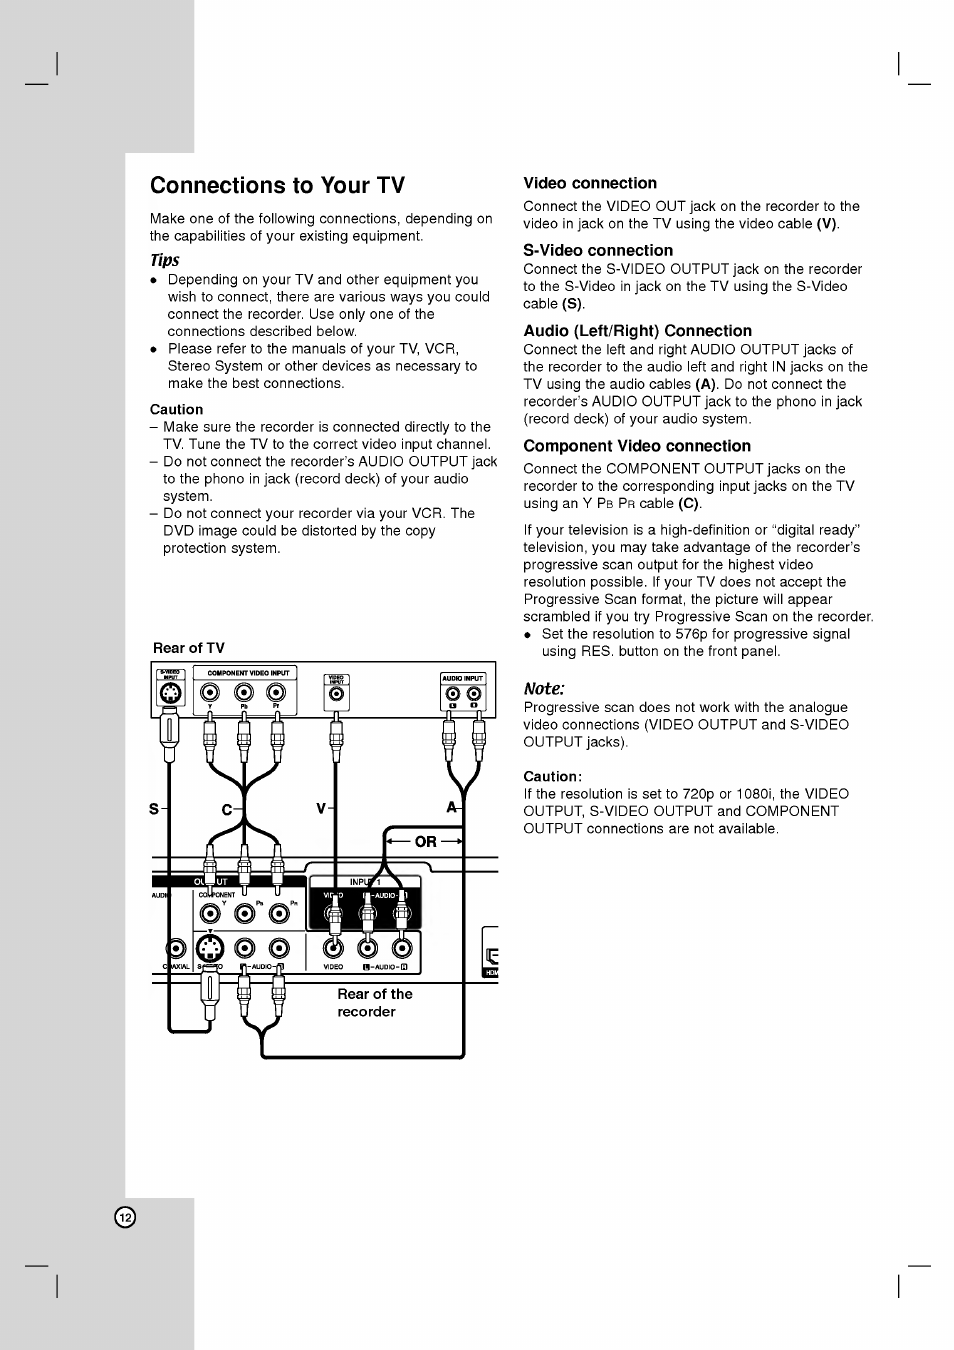 Connections to your tv, Tips, Caution | Rear of tv, Note | LG RH2T160 User Manual | Page 12 / 41